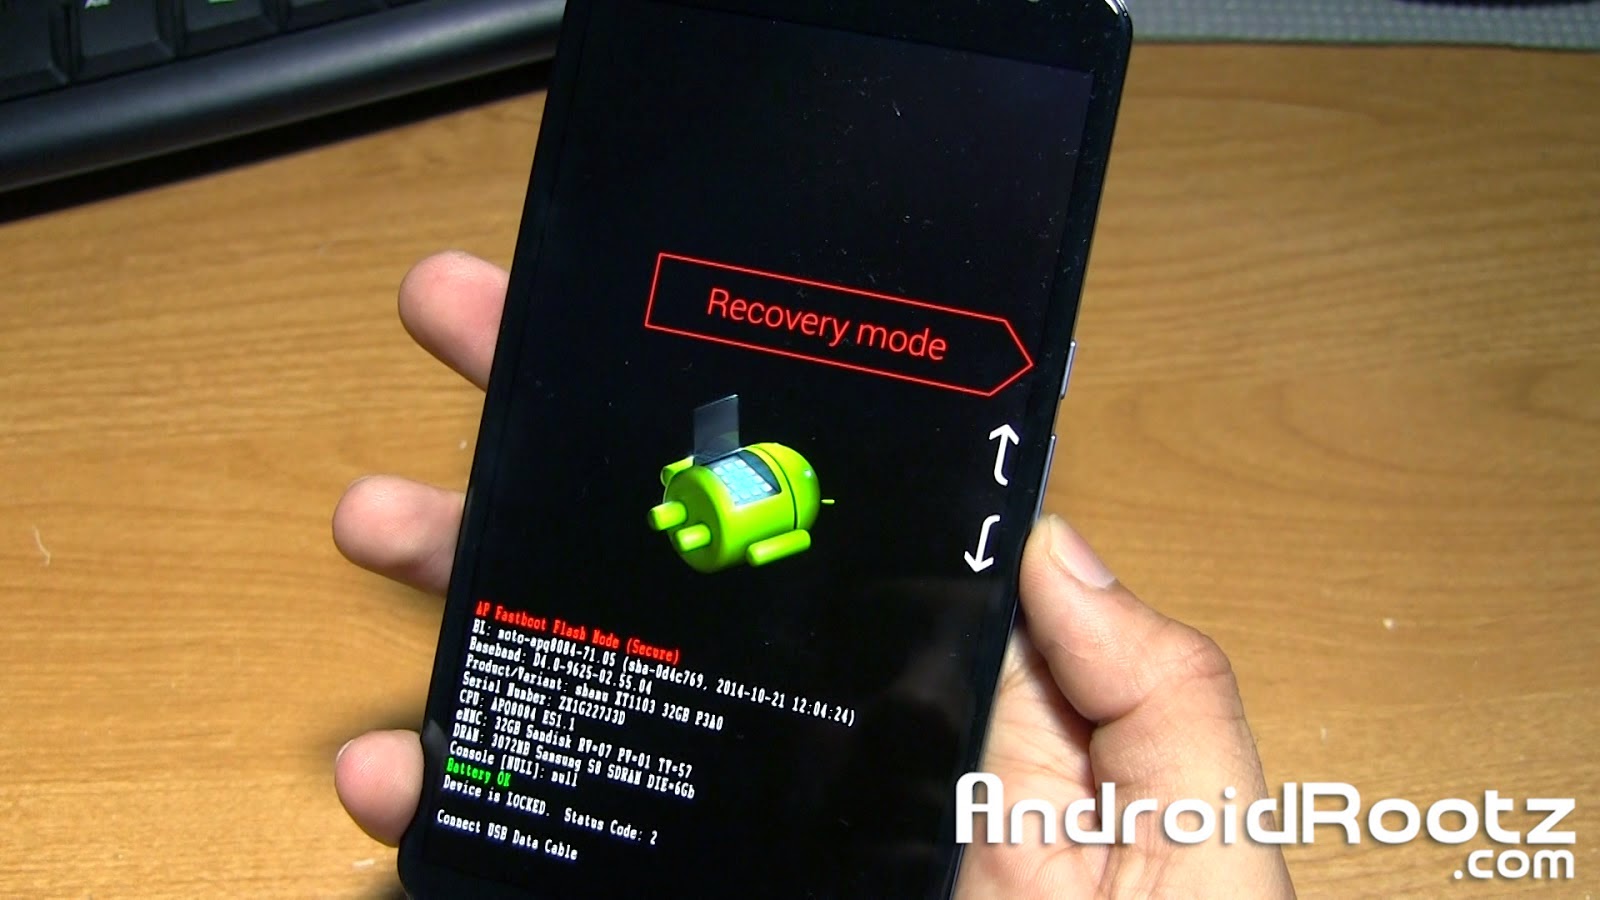 How to Fix Dead Android in Recovery Mode on Nexus 6! ~ AndroidRootz ...